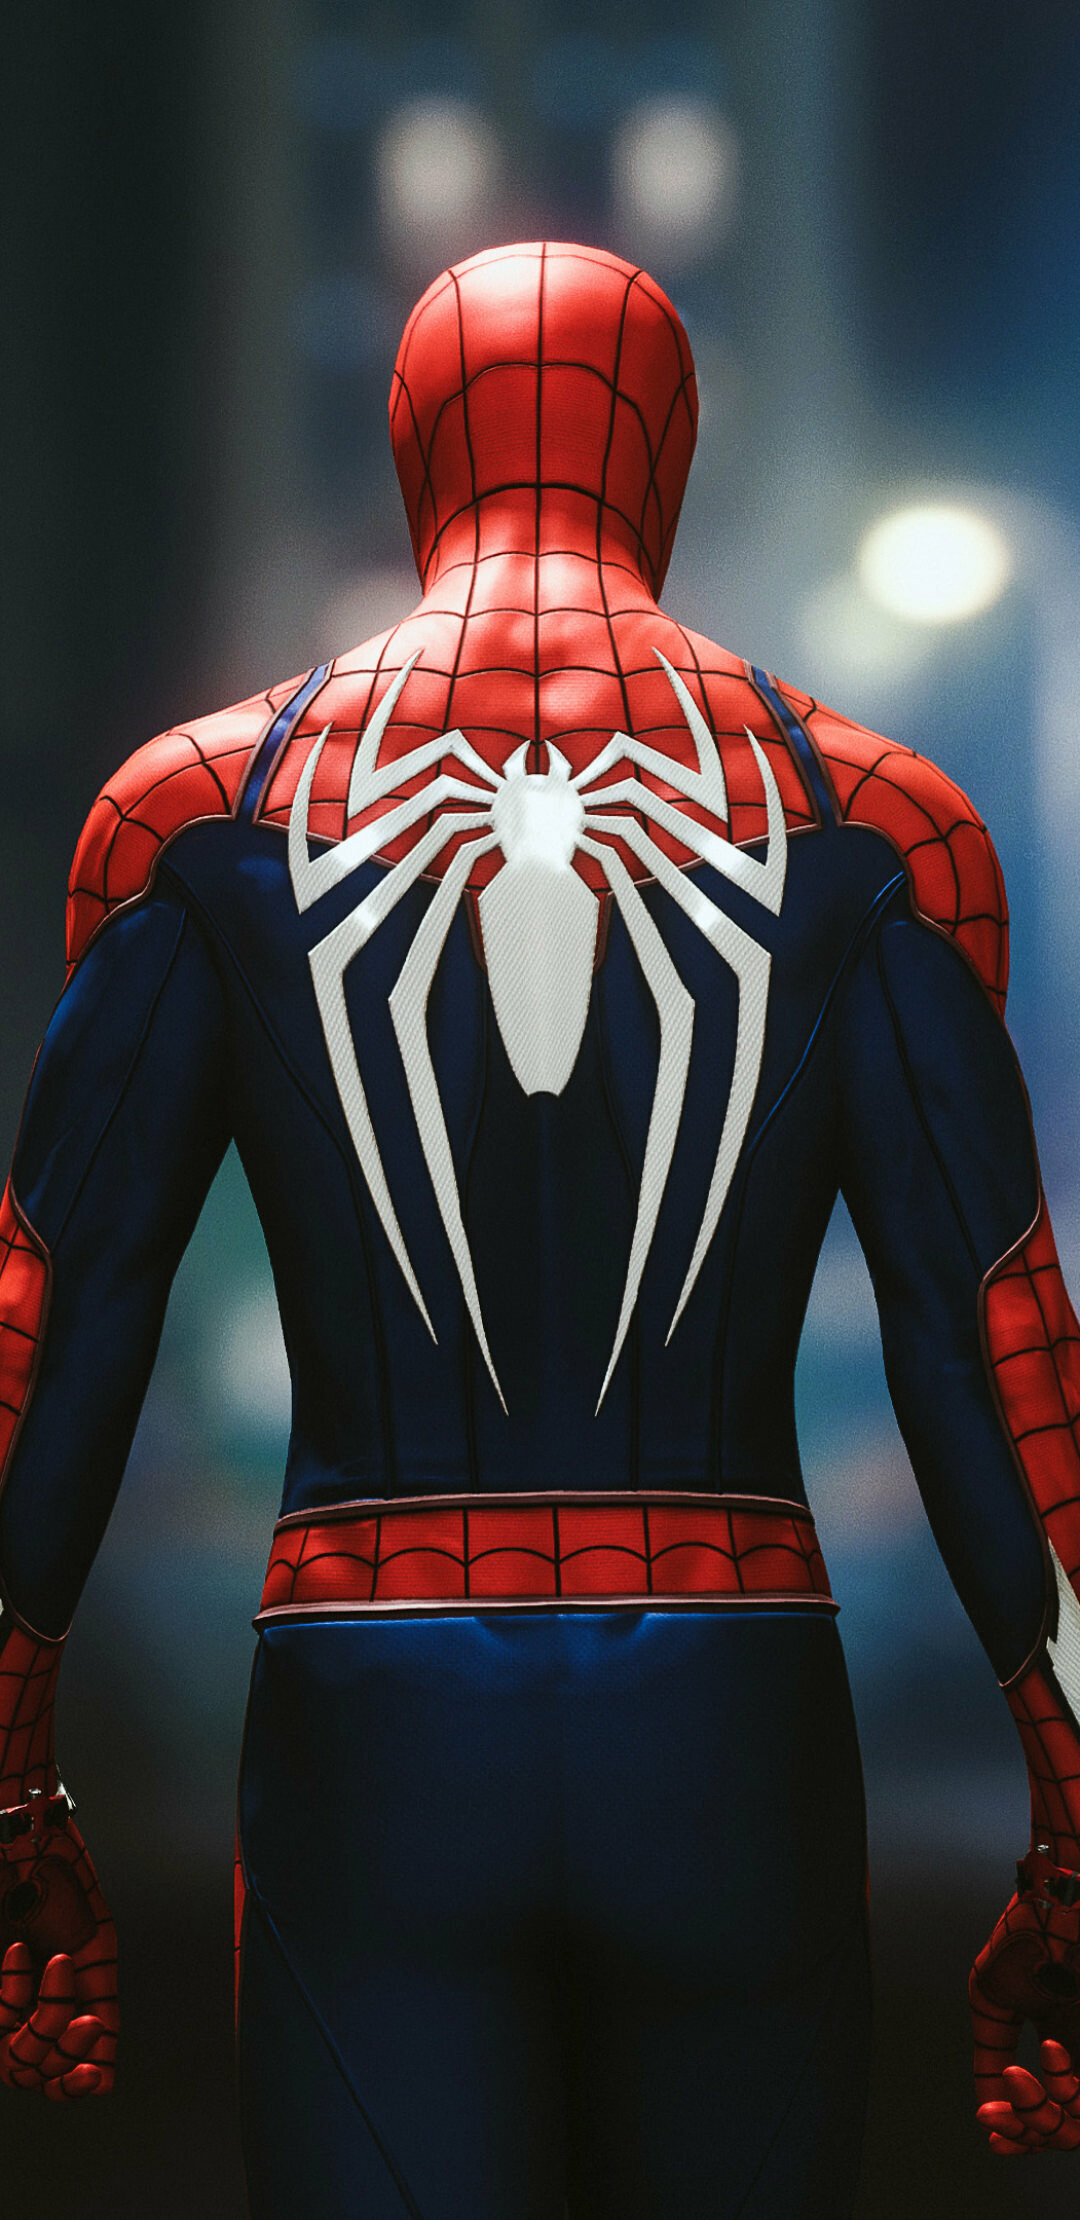 Marvel Heroes: Spider-Man, A superhero with superhuman strength and speed. 1080x2220 HD Background.